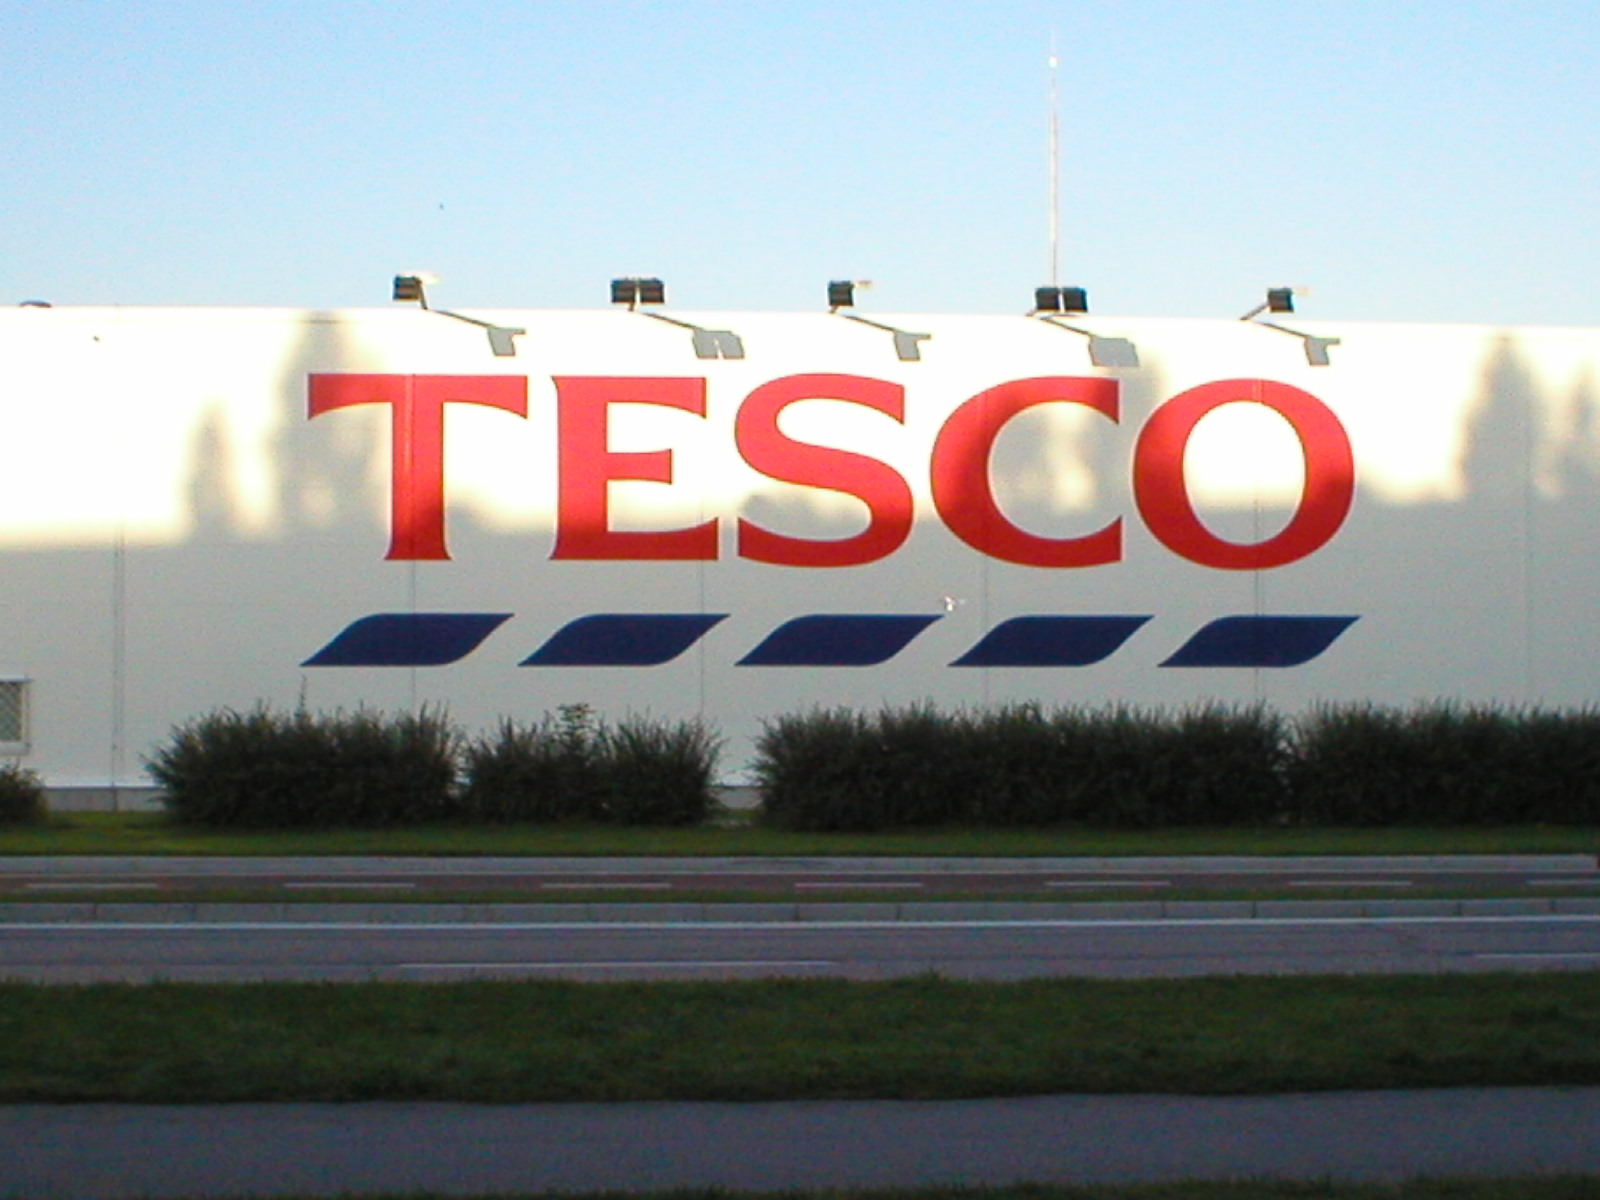 Tesco Value iPhone Wallpaper by TheCosmicPope on DeviantArt